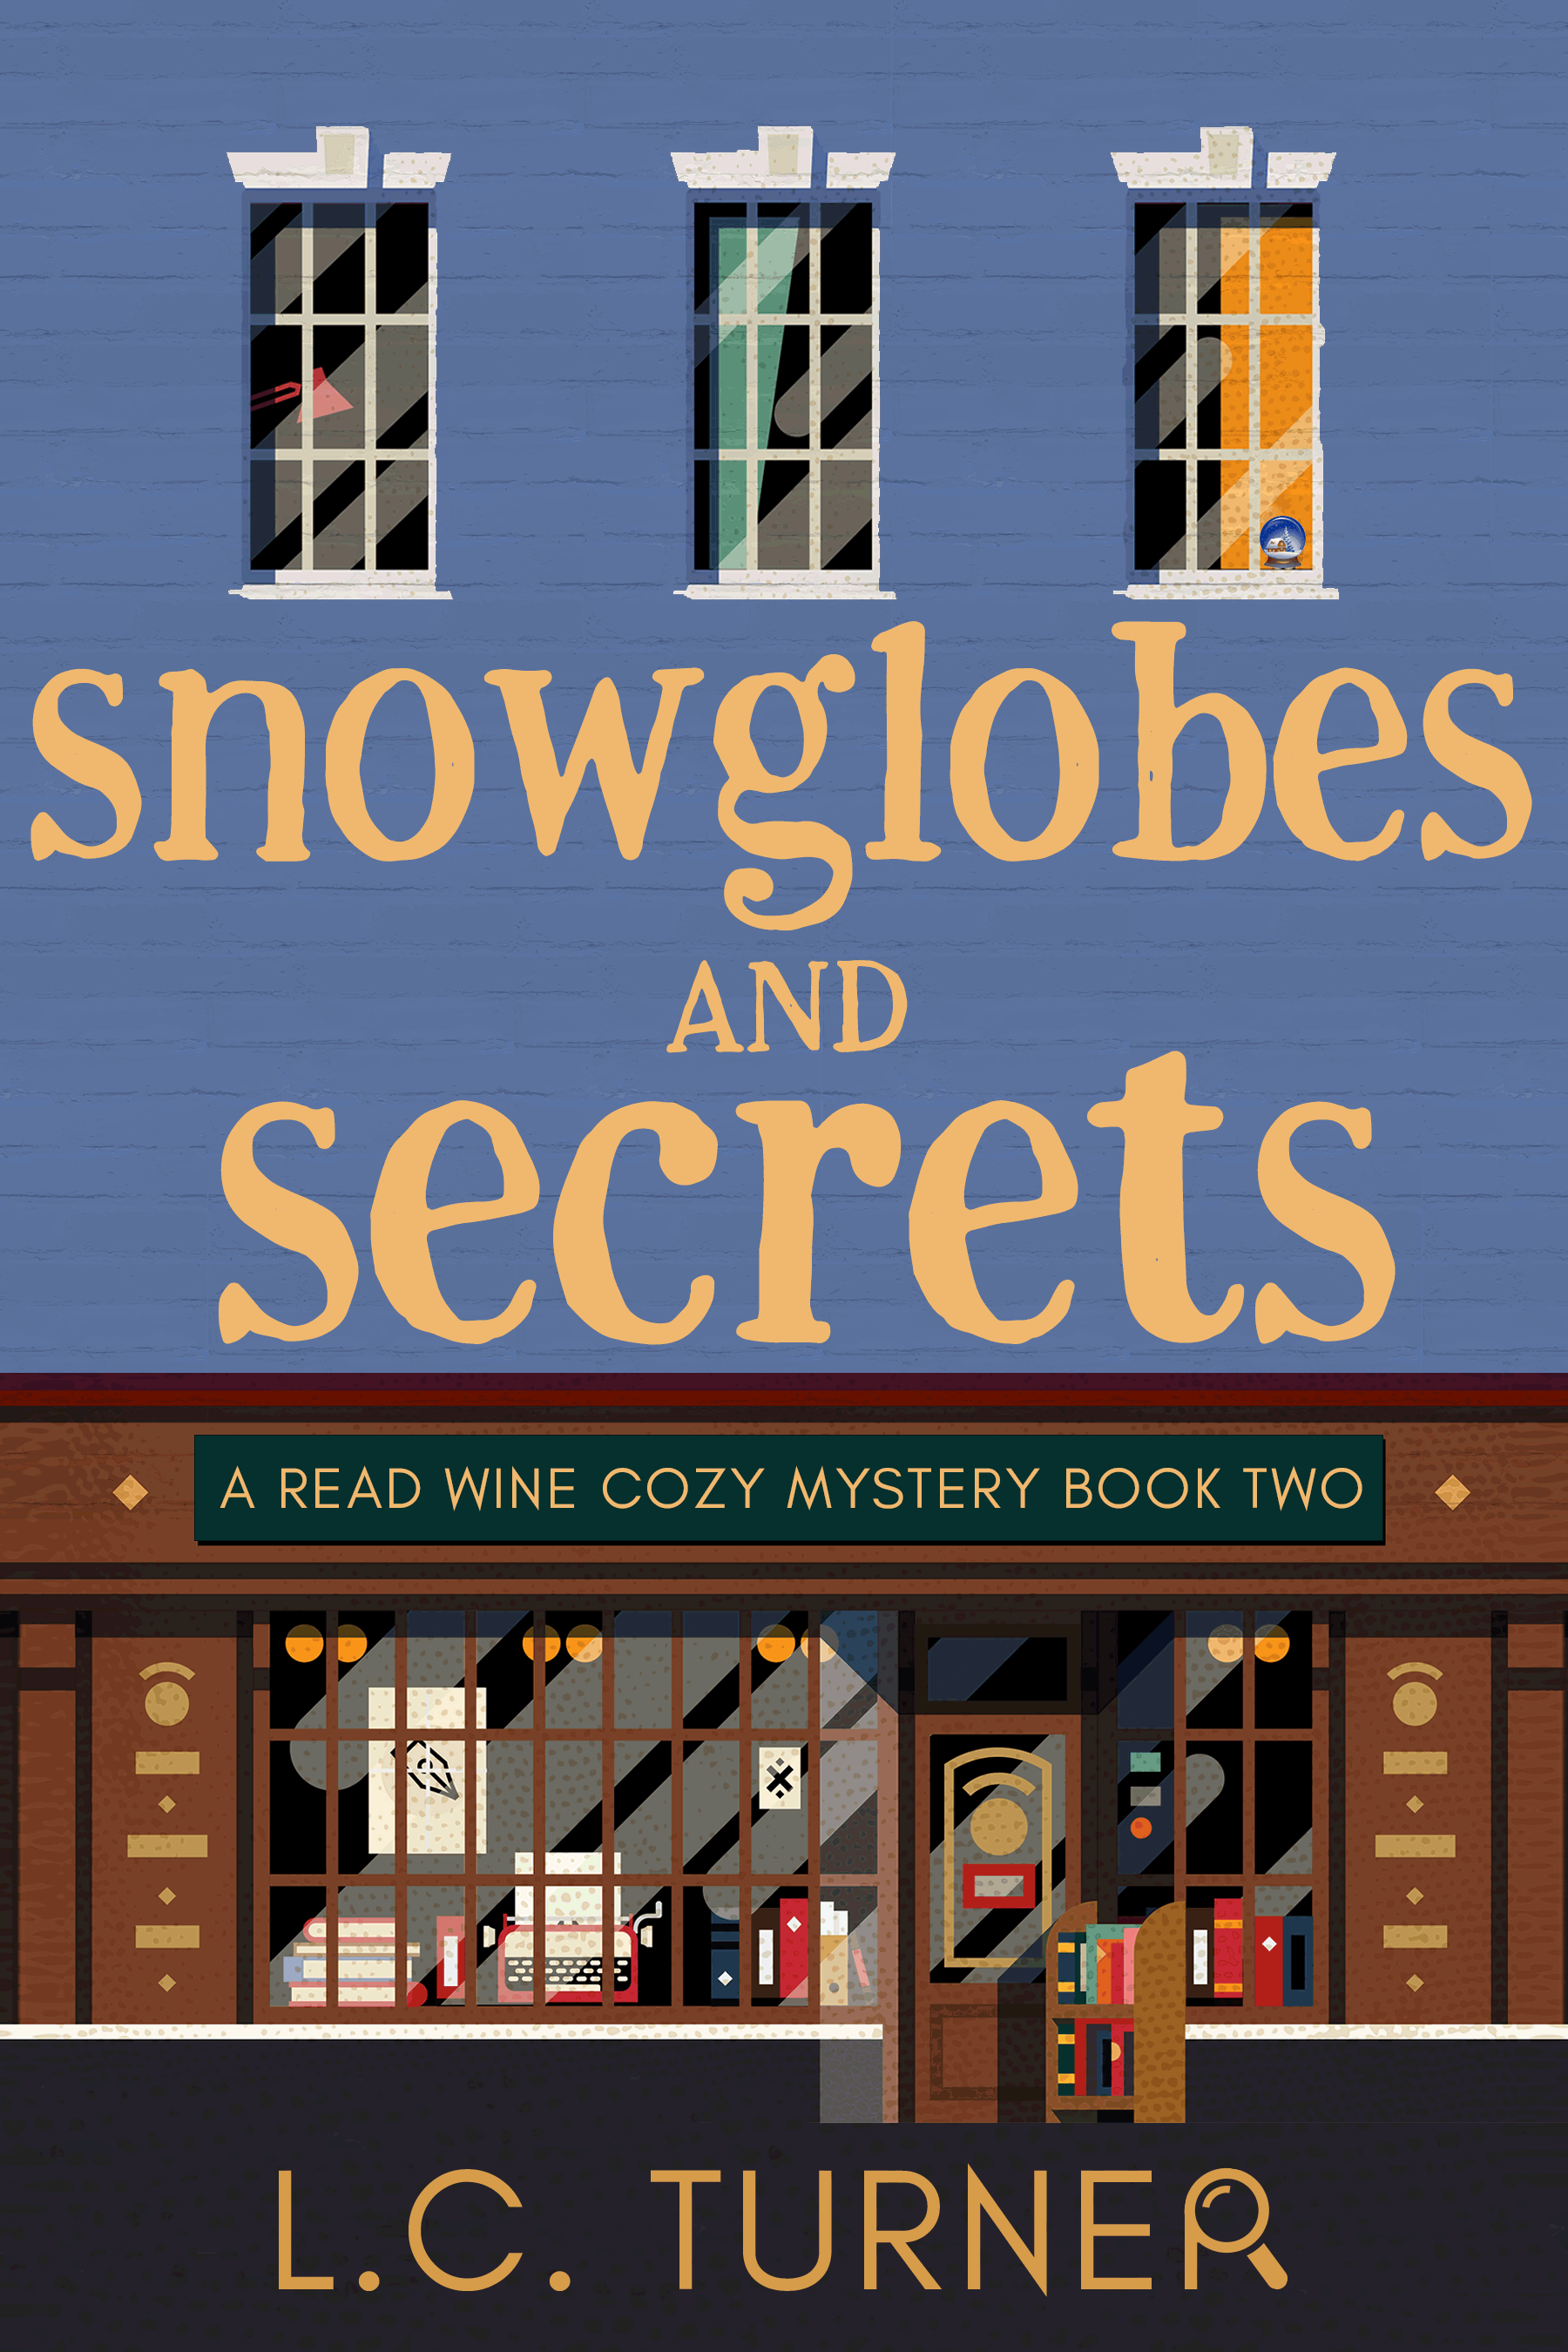 Snowglobes and Secrets – A Read Wine Bookstore Cozy Mystery Book 2